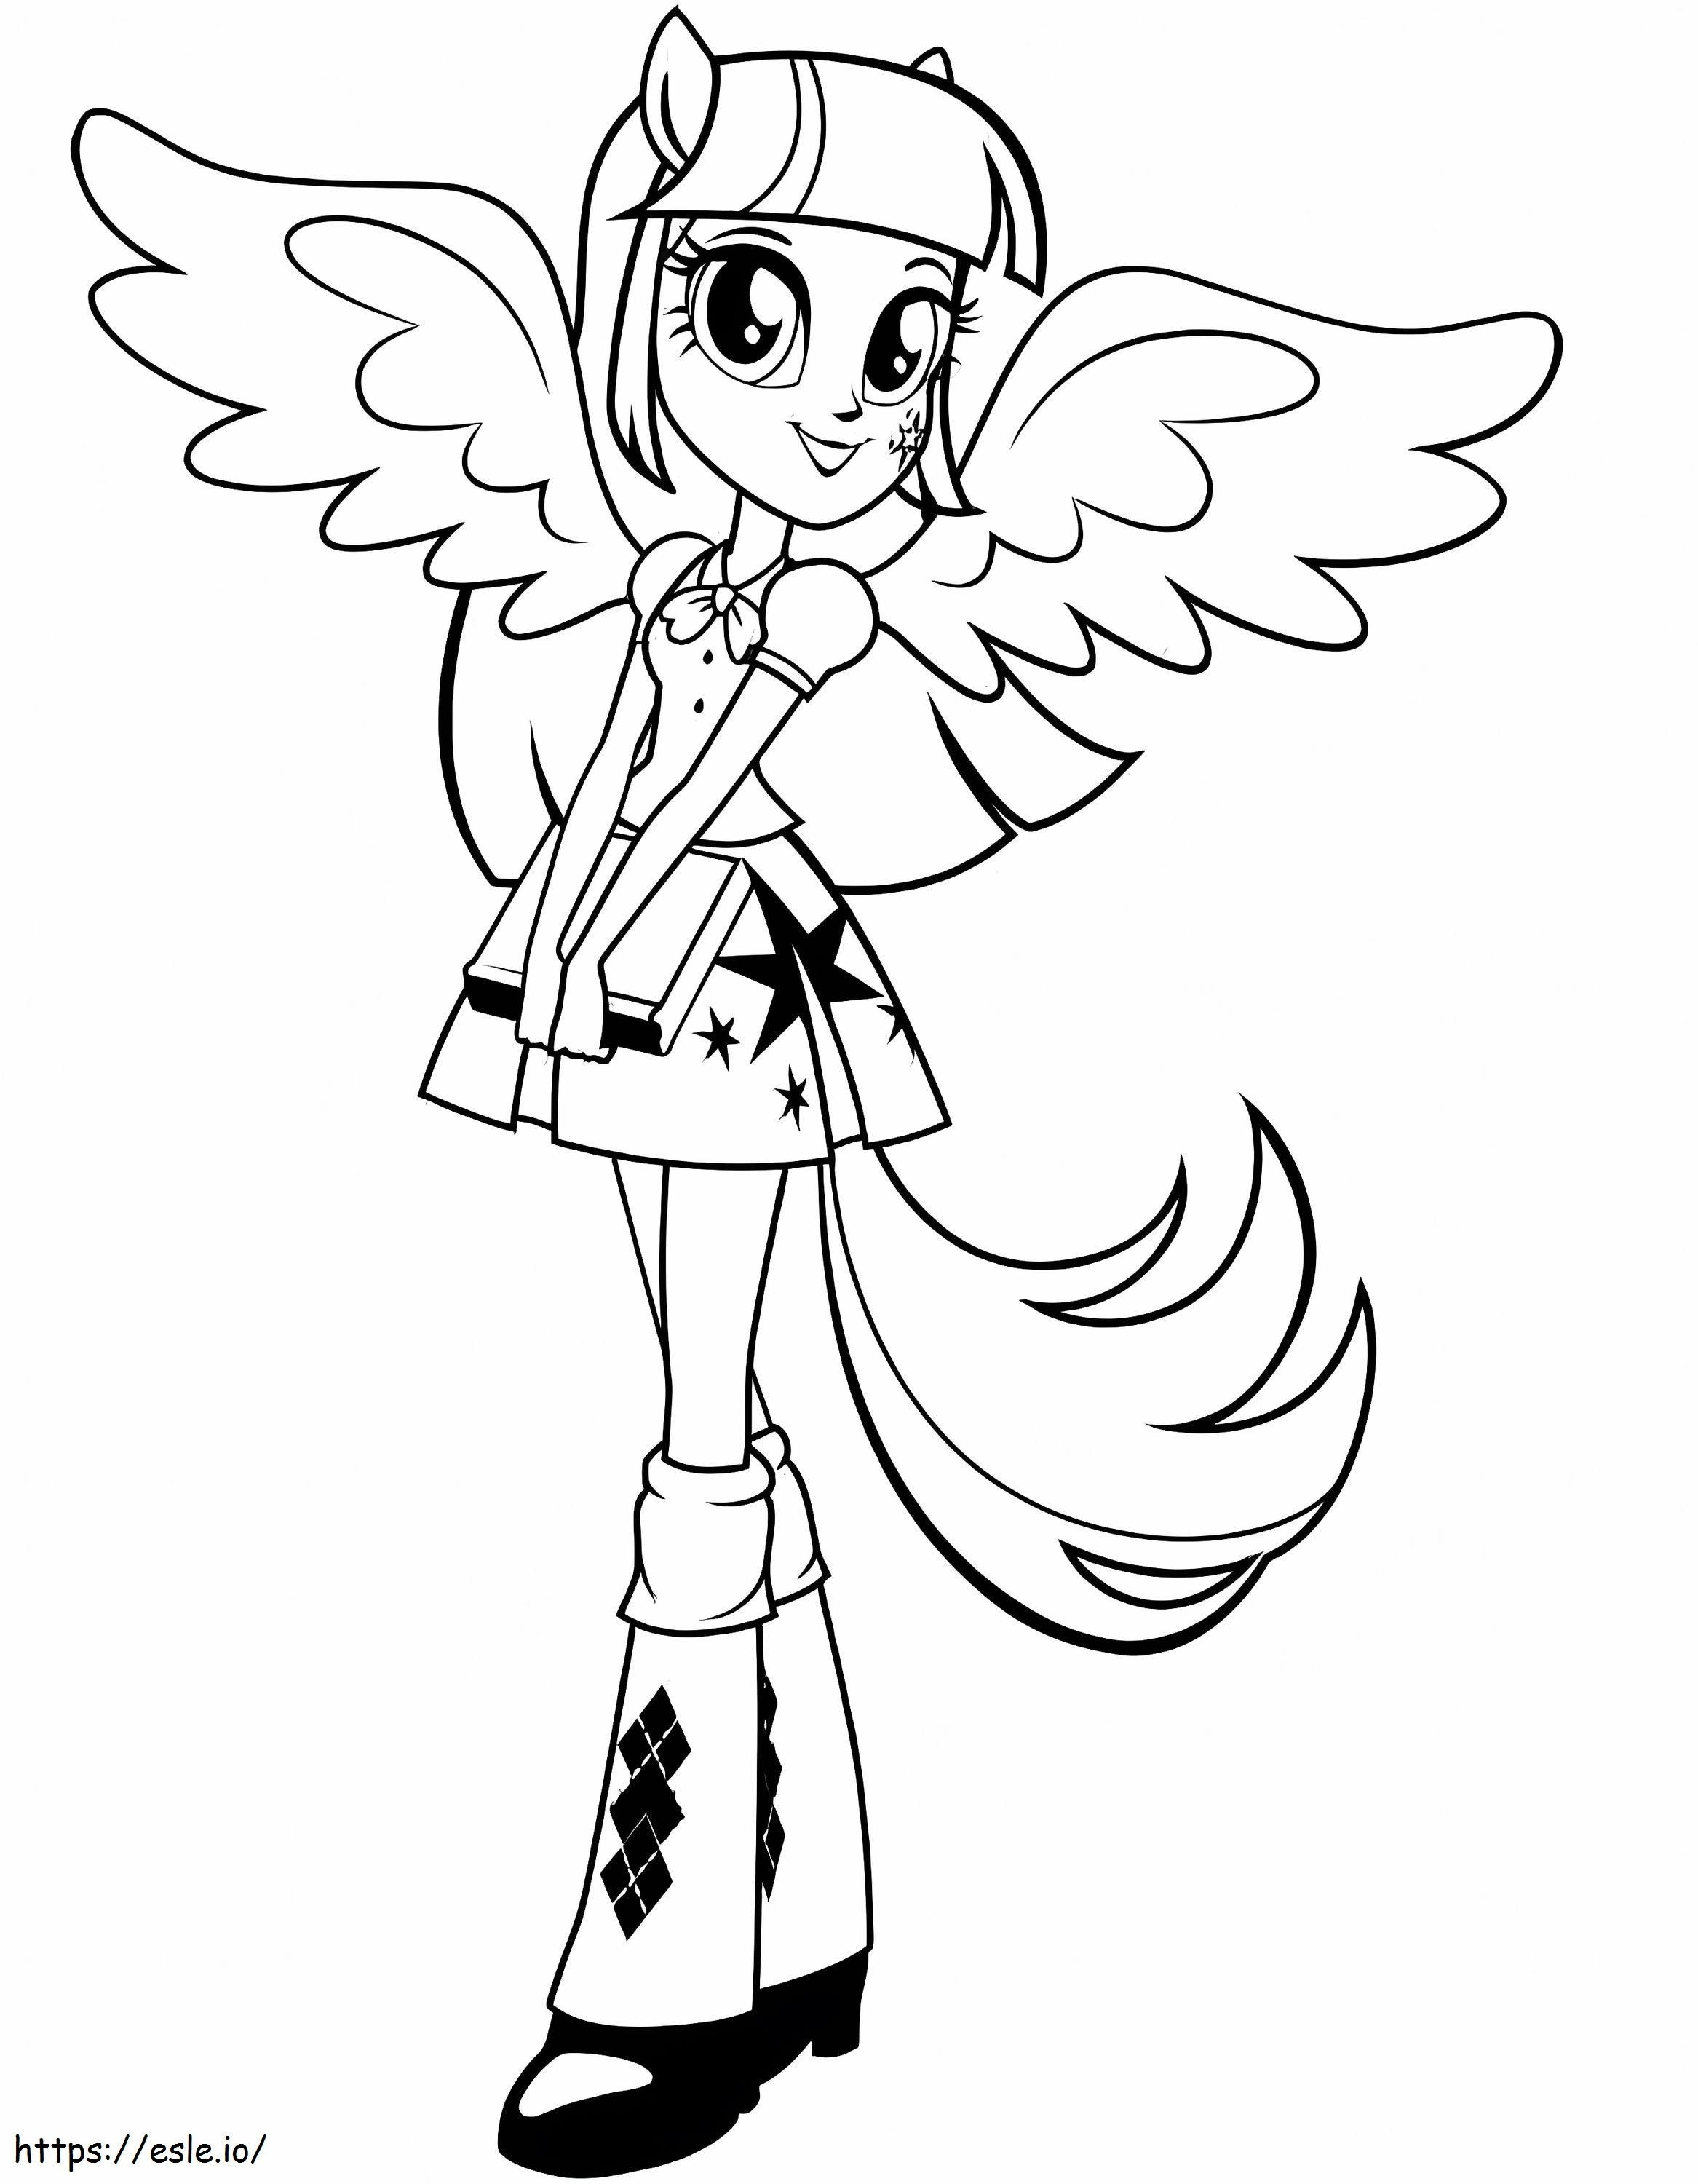 Equestria Girls 17 coloring page